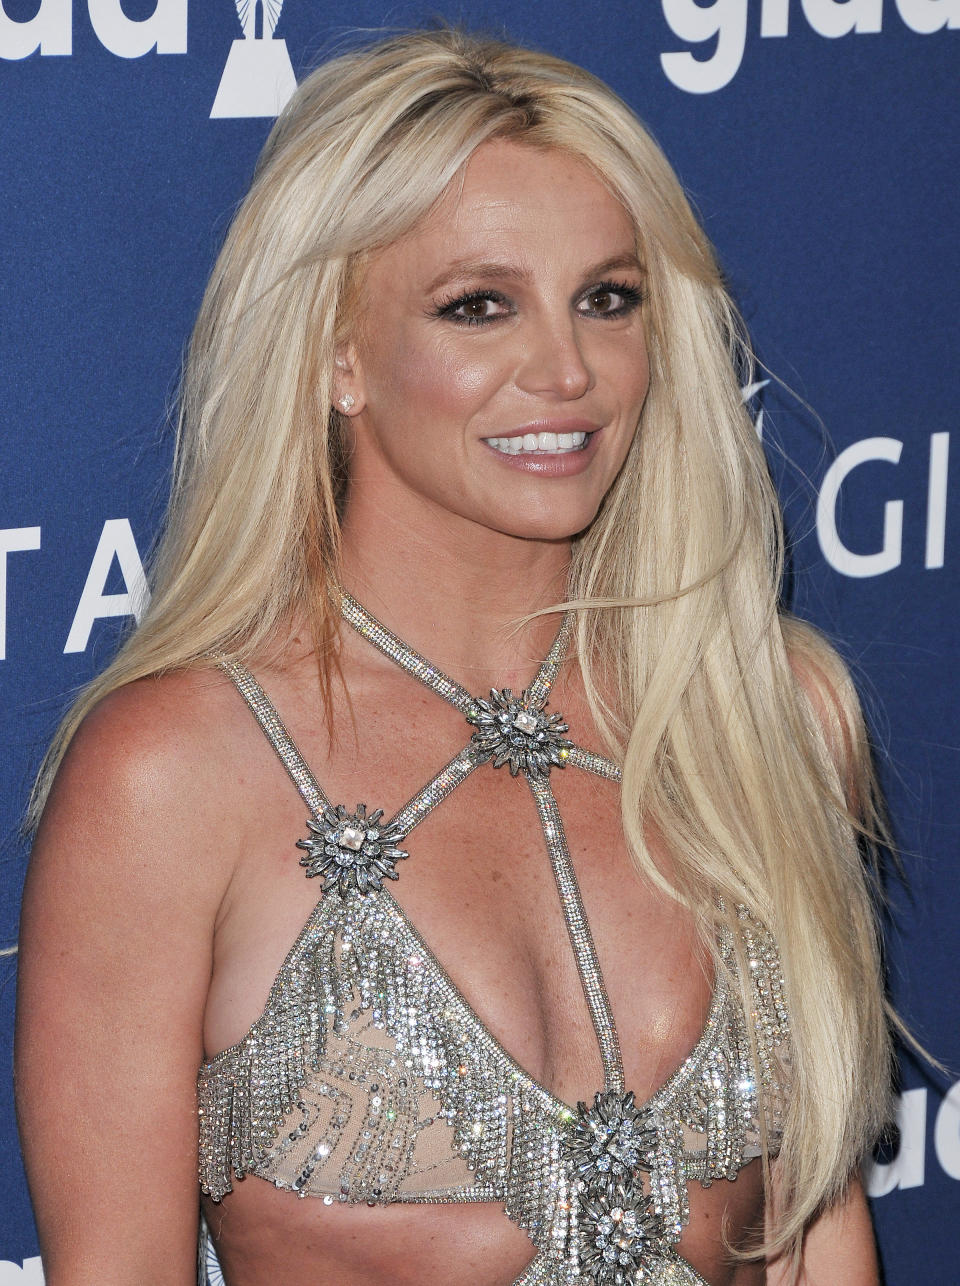 Britney Spears arrives at the 29th Annual GLAAD Media Awards held at The Beverly Hilton in Beverly Hills, CA on Thursday, April 12, 2018. (Photo By Sthanlee B. Mirador/Sipa USA)